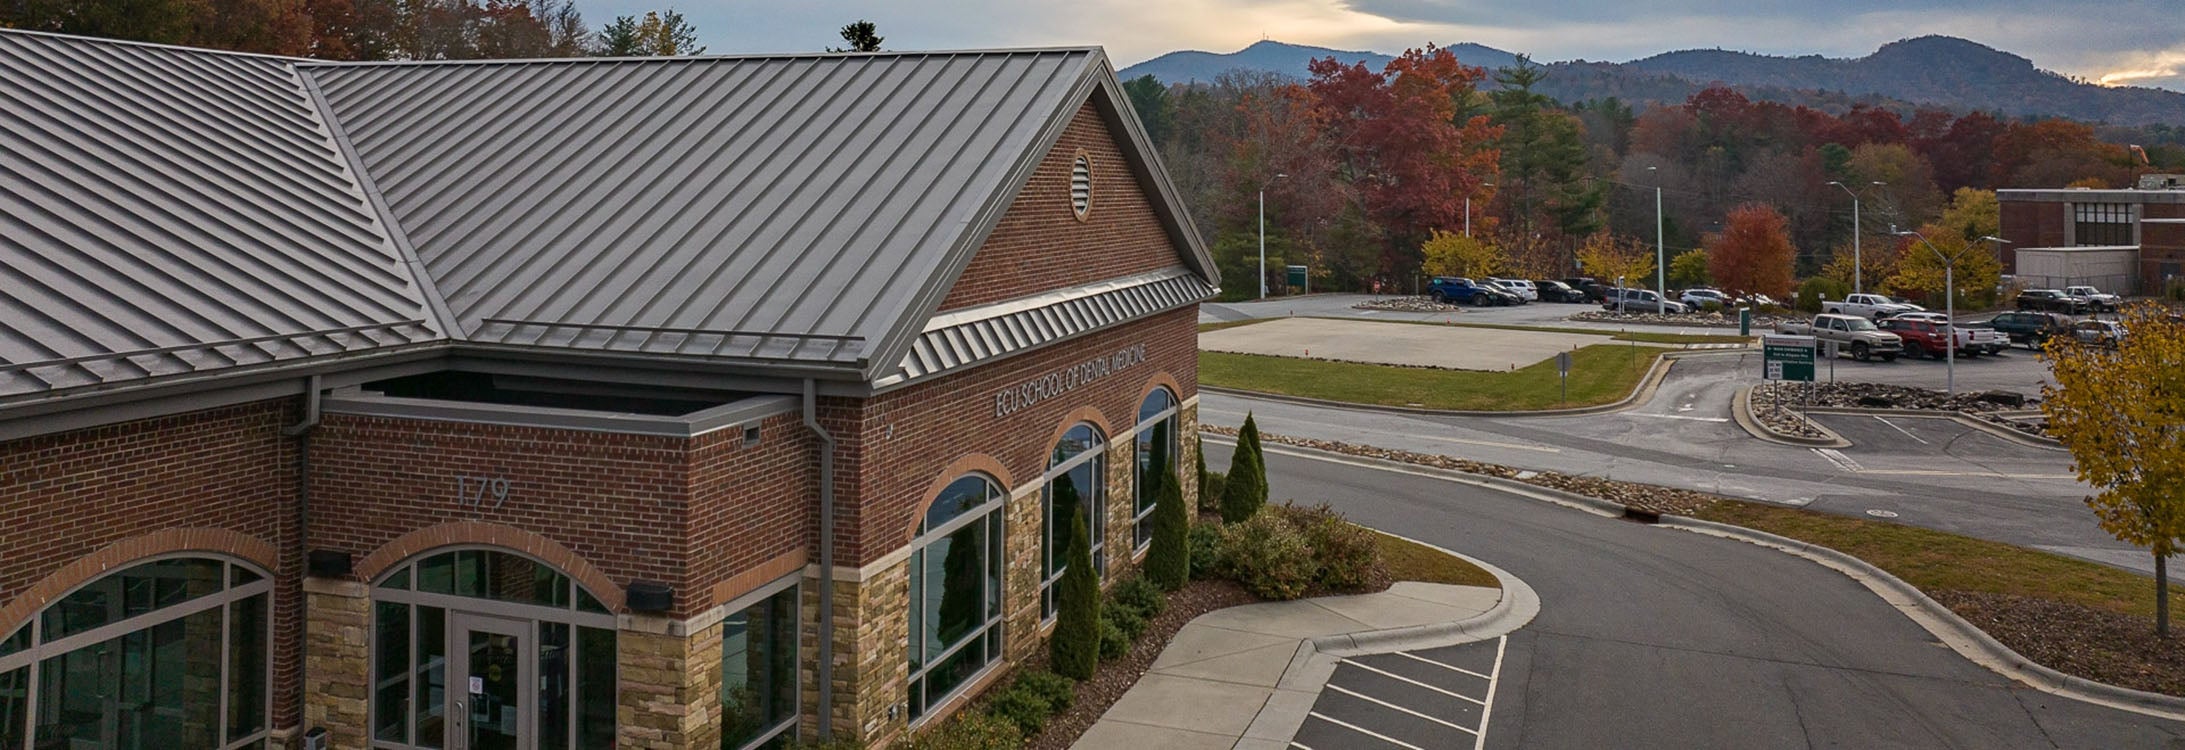 The School of Dental Medicine’s community service learning center in Spruce Pine is one of eight such centers in rural areas across the state, where students gain valuable patient experiences.